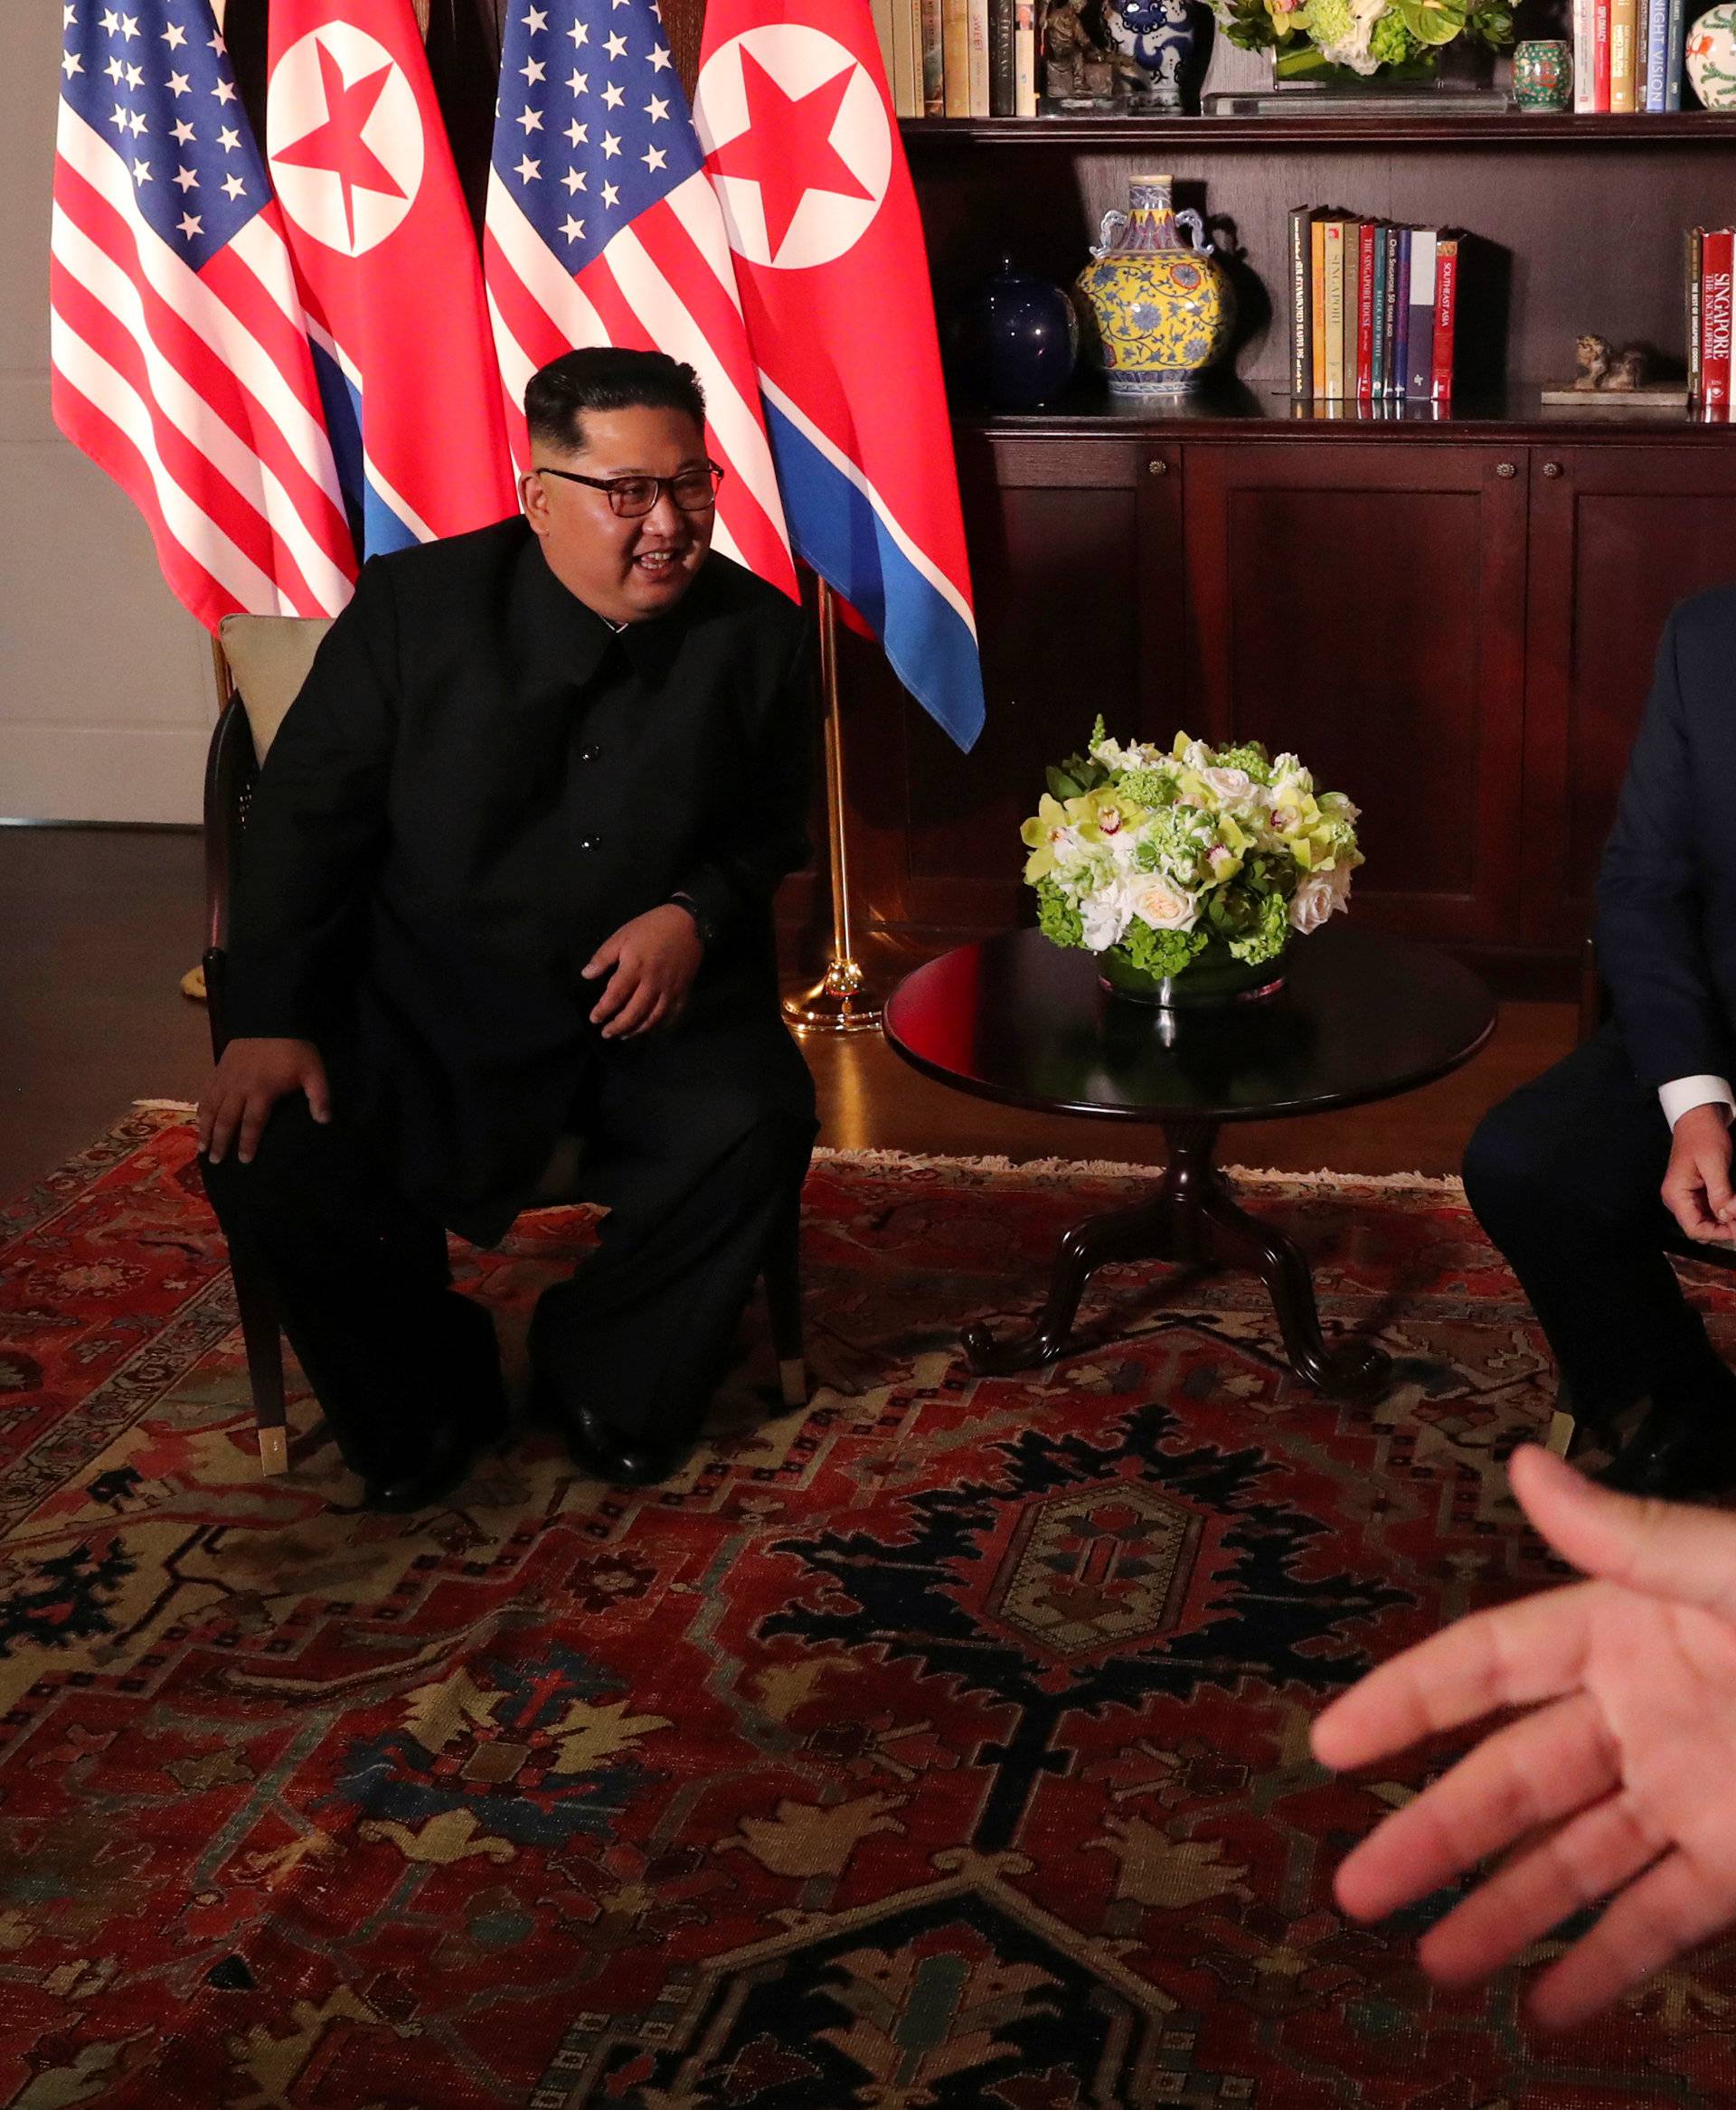 U.S. President Donald Trump and North Korea's leader Kim Jong Un smile before their meeting in Singapore